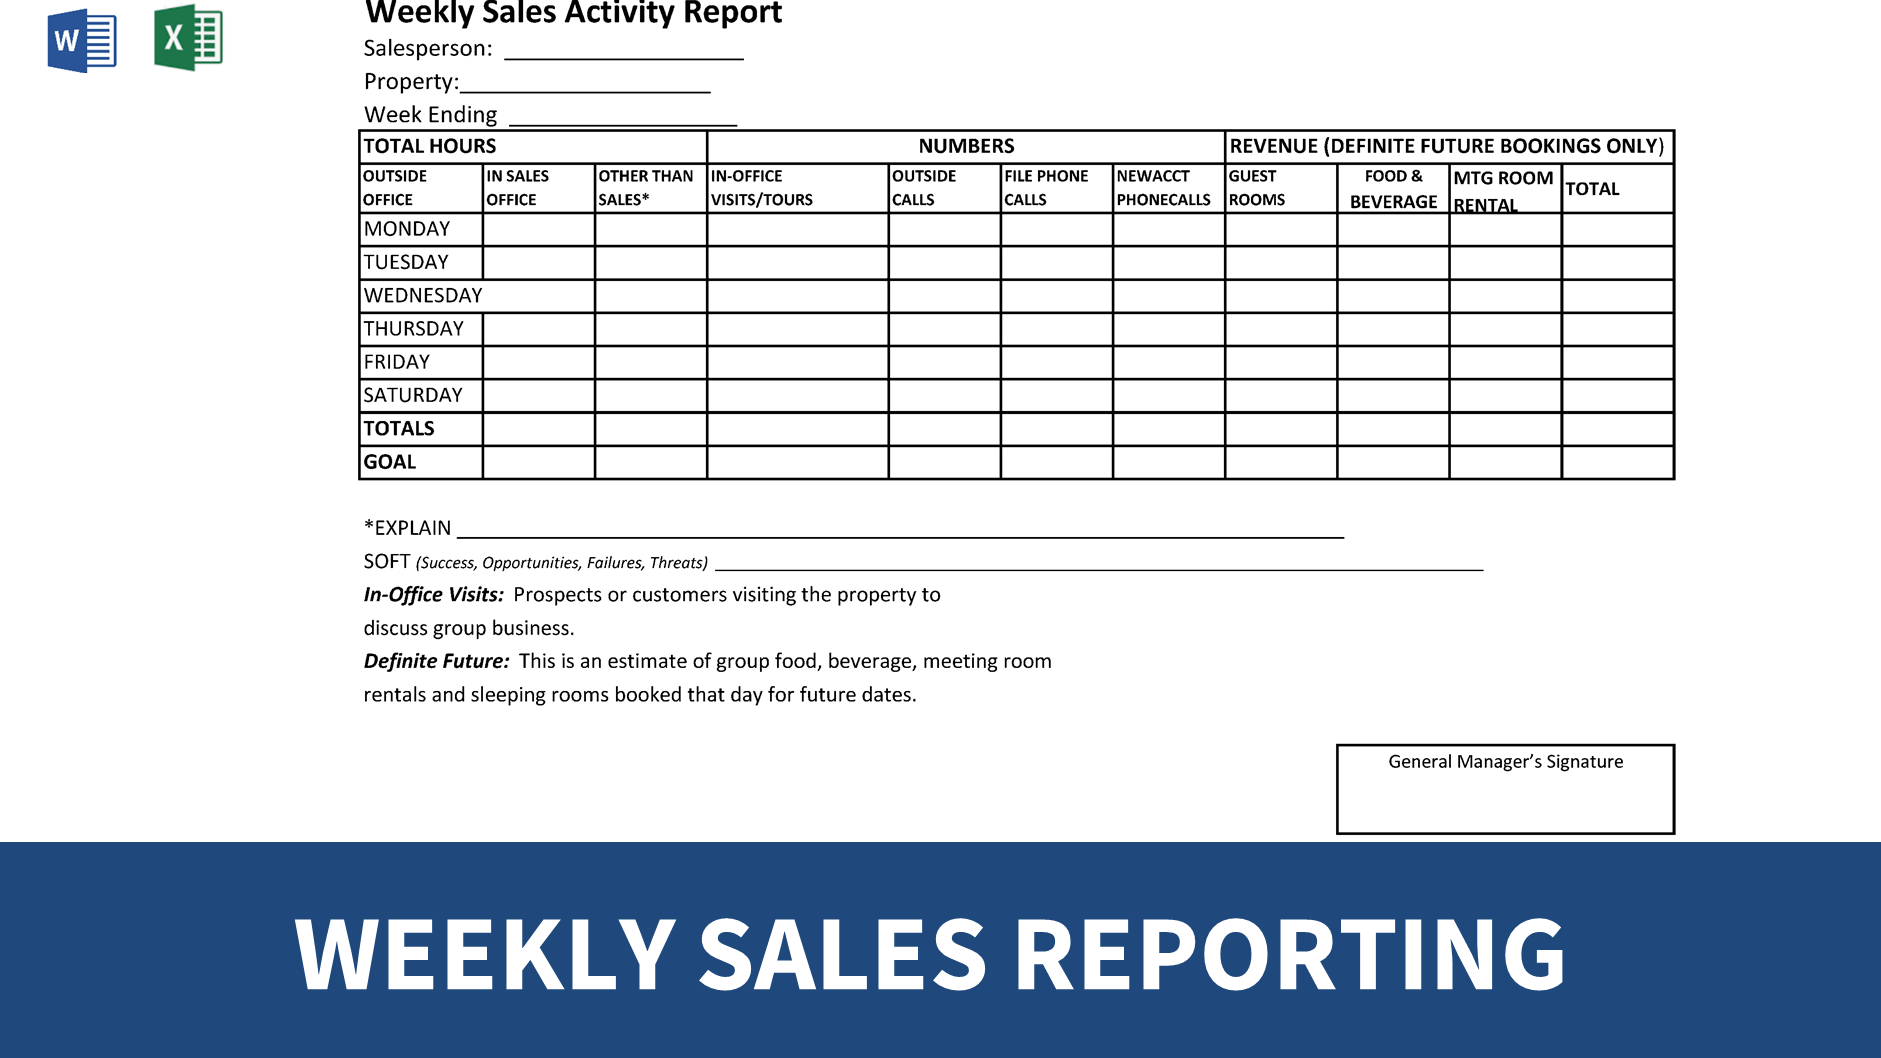 Weekly Activity Sales Report main image